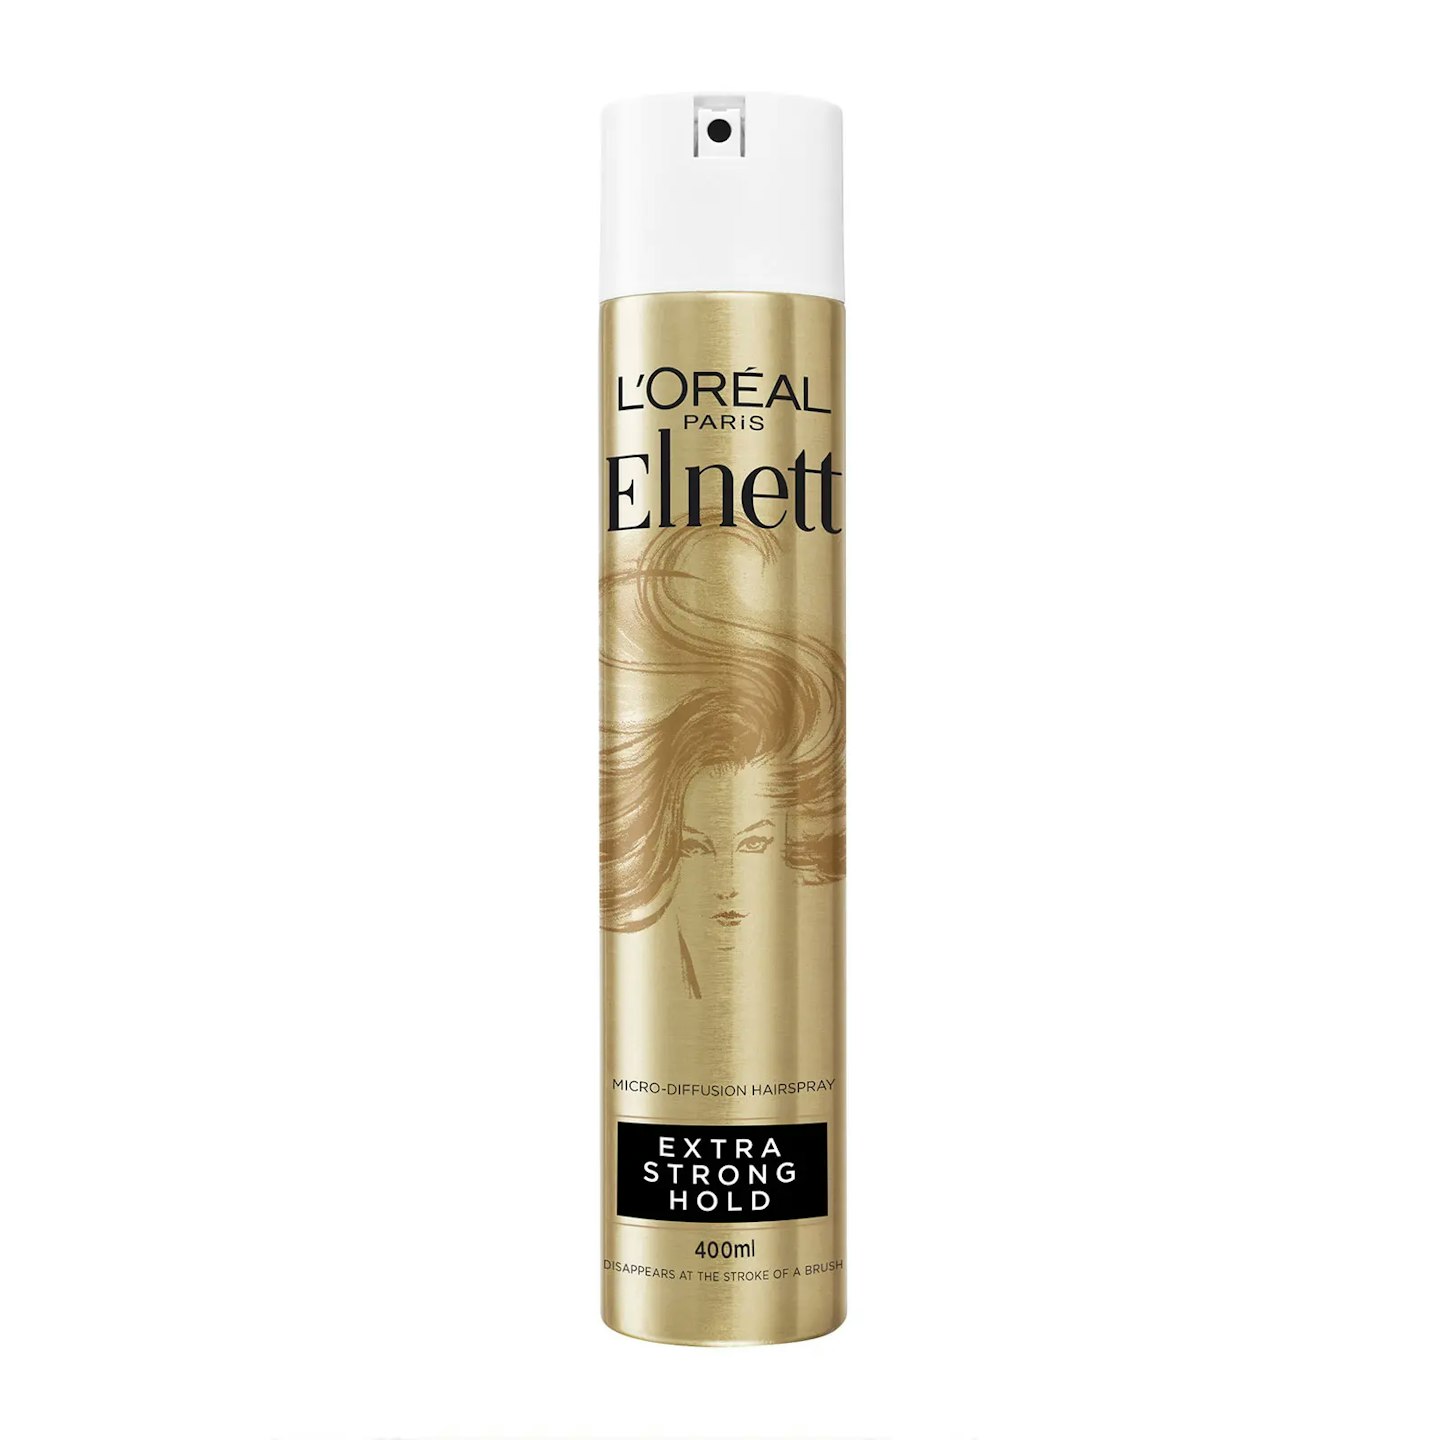 L'Oreal Paris Hairspray by Elnett for Extra Strong Hold & Shine